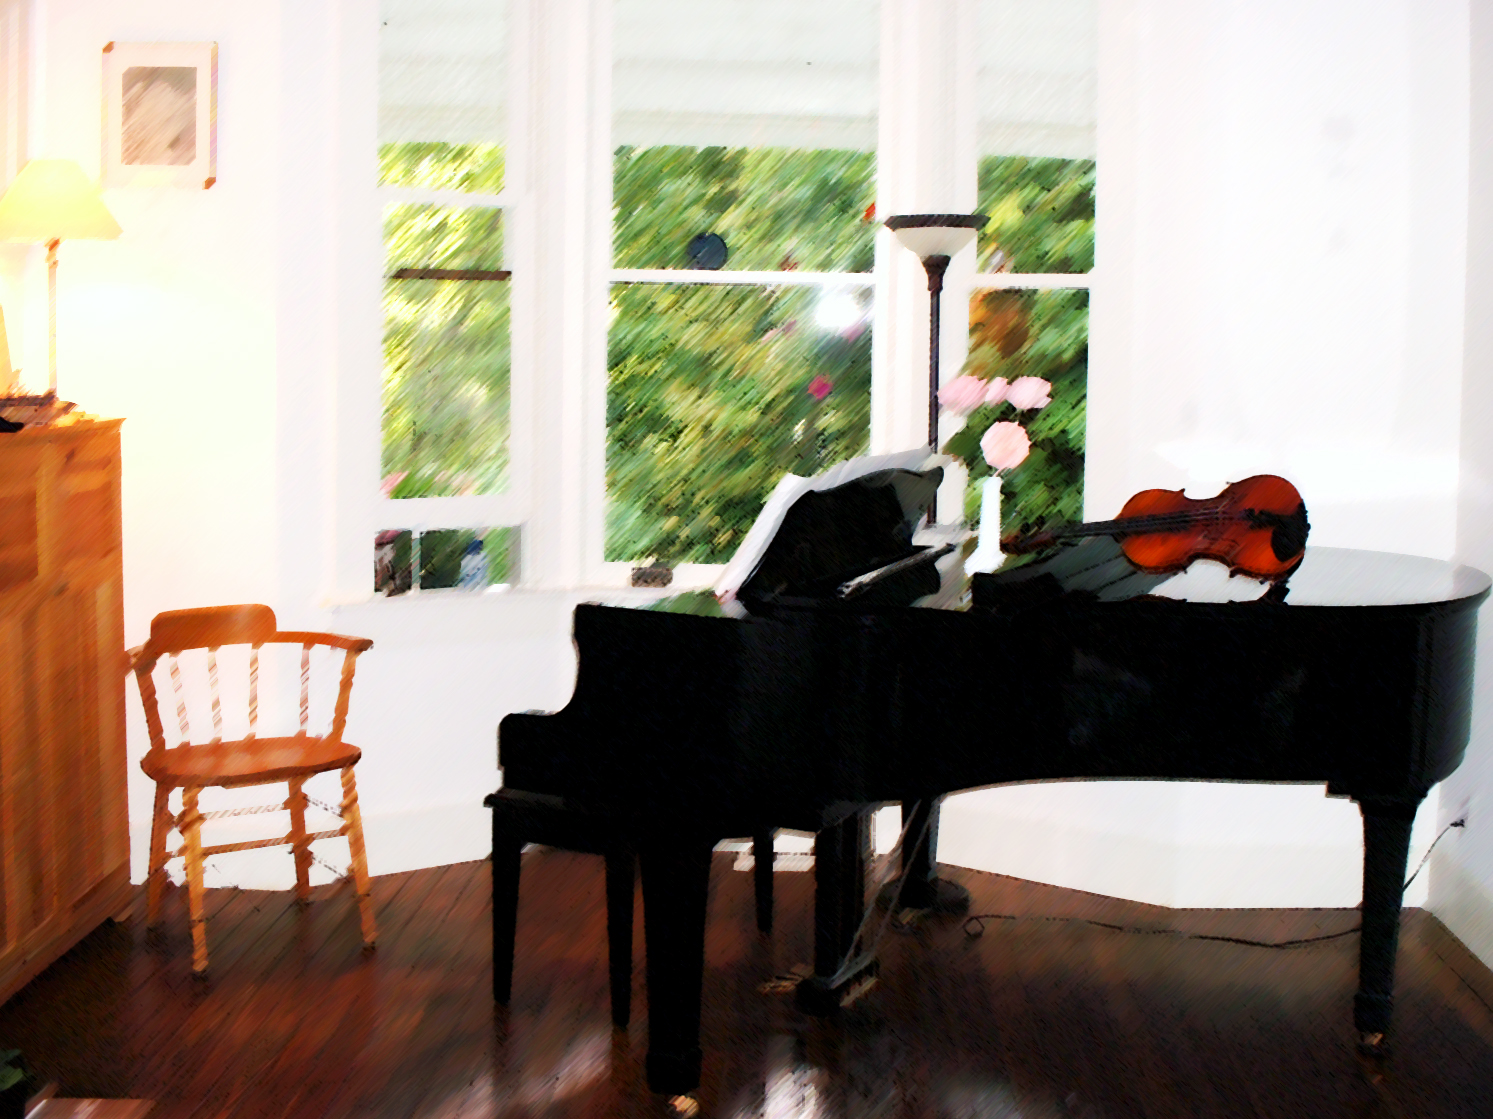 Bay window in a heritage home with a black grand piano and a violin